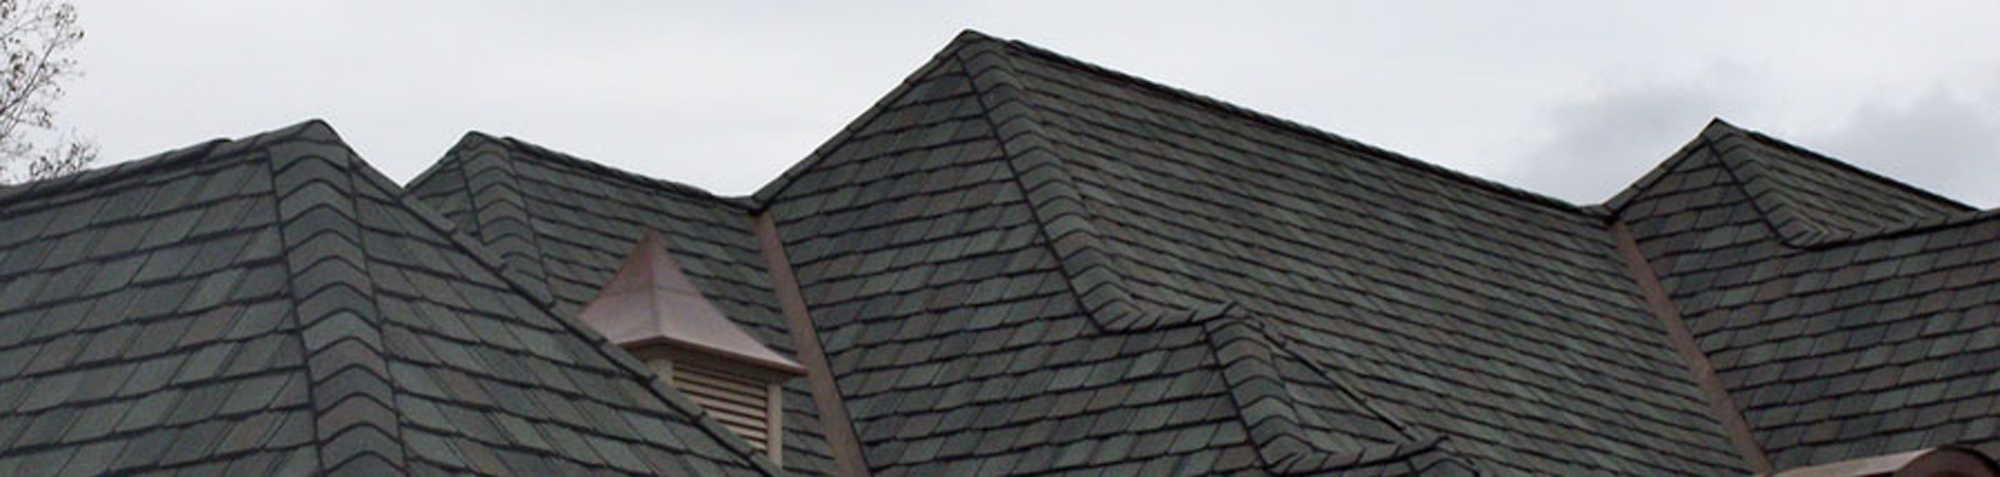 This is an image of just the top of a beautiful new blackish/grayish roof that our South Shore roofing company installed on a home that has multiple roof peaks . The roof has many peaks and levels and was installed on a beautiful brick home. It is an example of the roof repair, roof replacement, and roof installation work that our South Shore roofing contractors' business does for homes and businesses in Braintree, Duxbury, Marshfield, Pembroke, Quincy, Hanover, Norwell, Plymouth, Weymouth, Scituate, and Cohasset MA